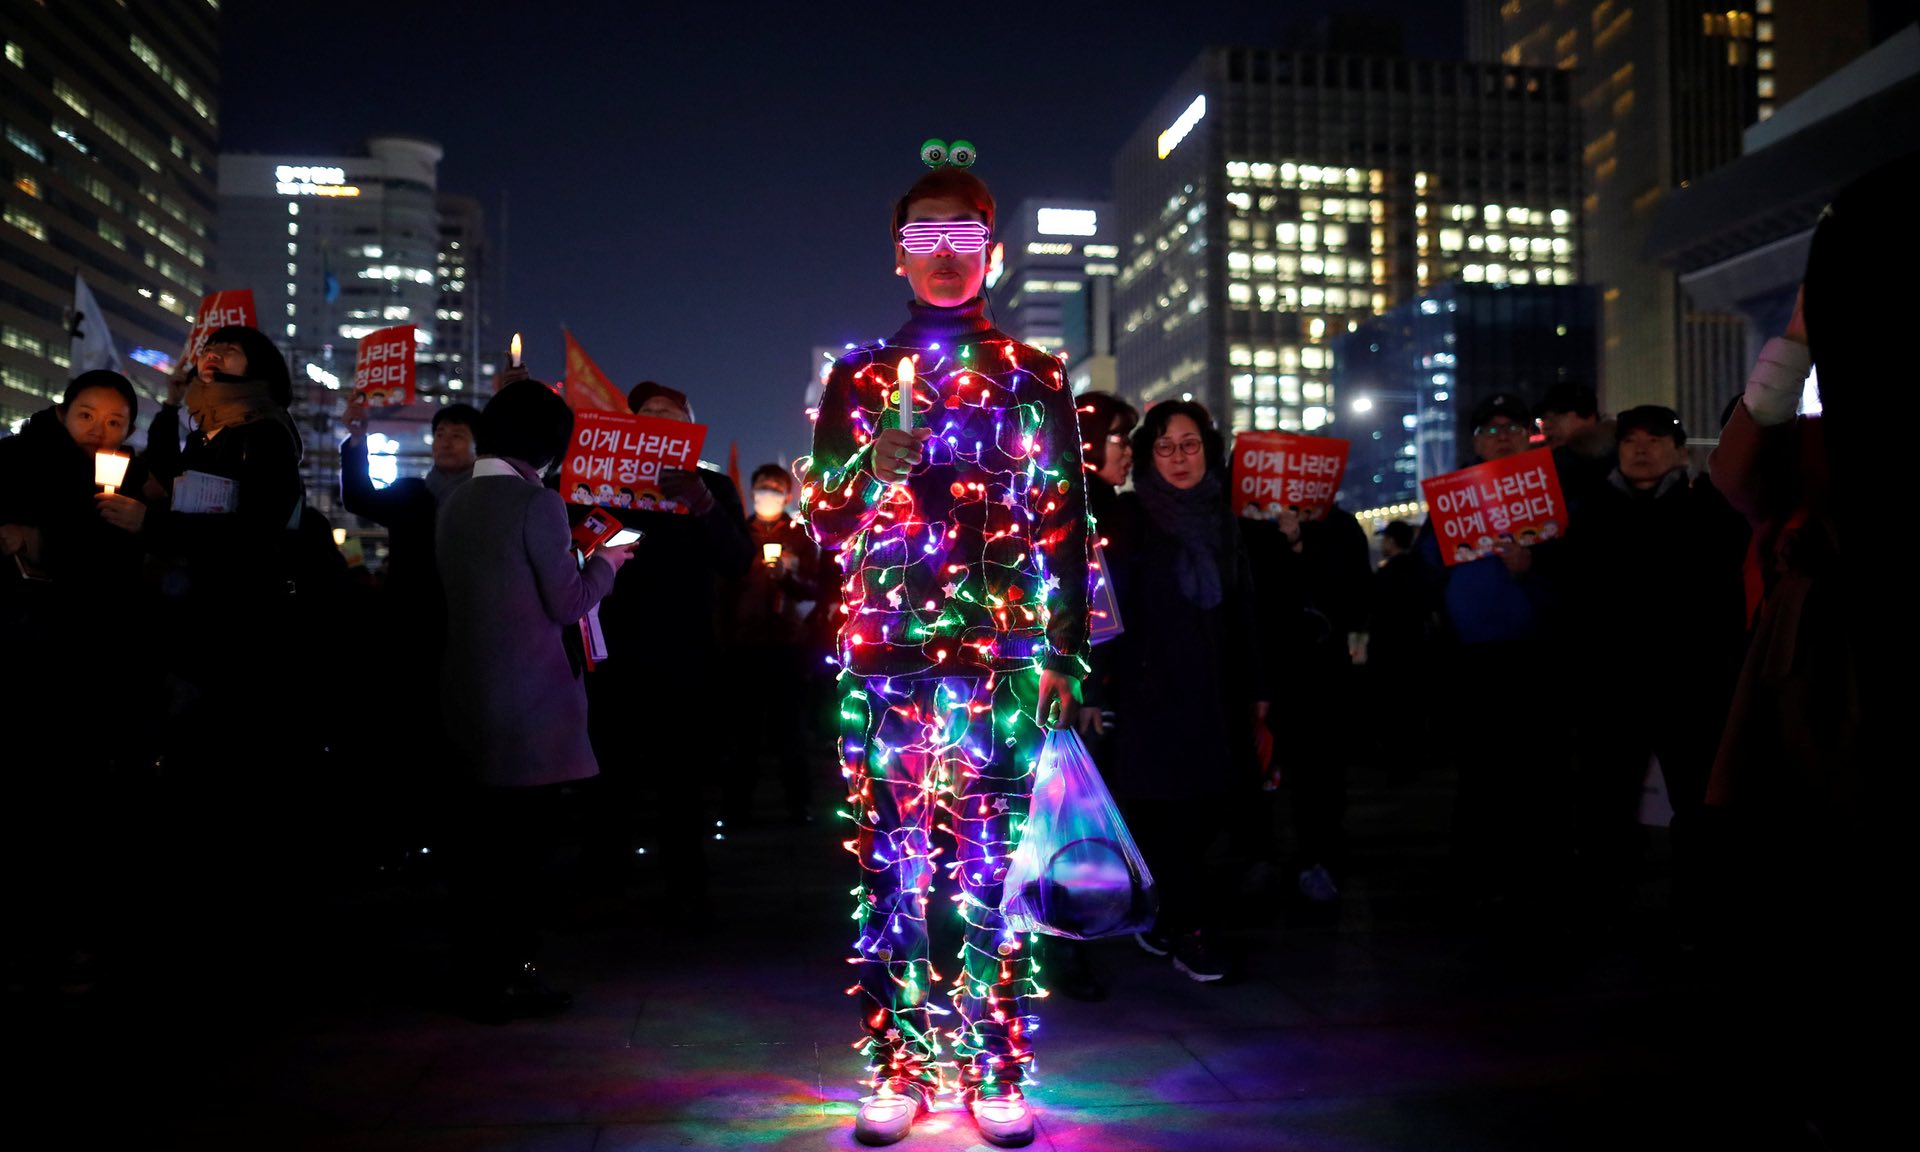 A demonstrator is illuminated by LED bulbs during a rally calling for impeached president Park Geun-hyeâs arrest, Seoul, South Korea. PHOTO: REUTERS